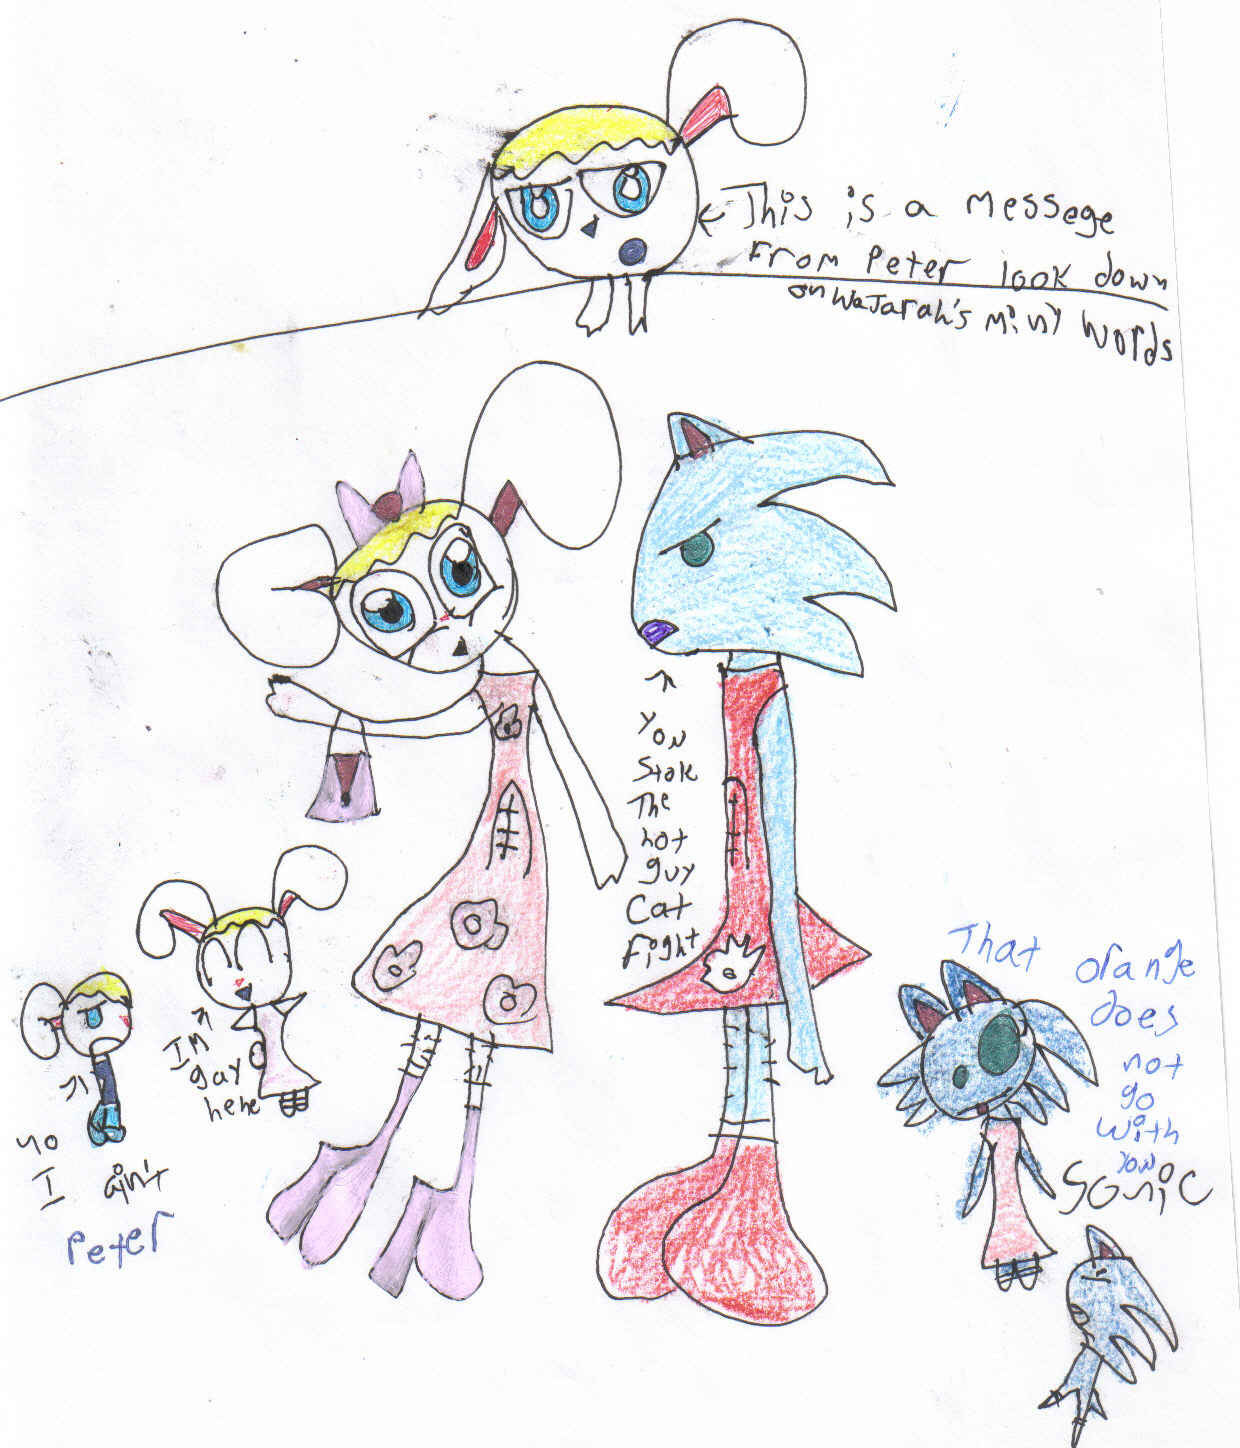 sonic and peters wierd night when amy and cola lea by wajarah